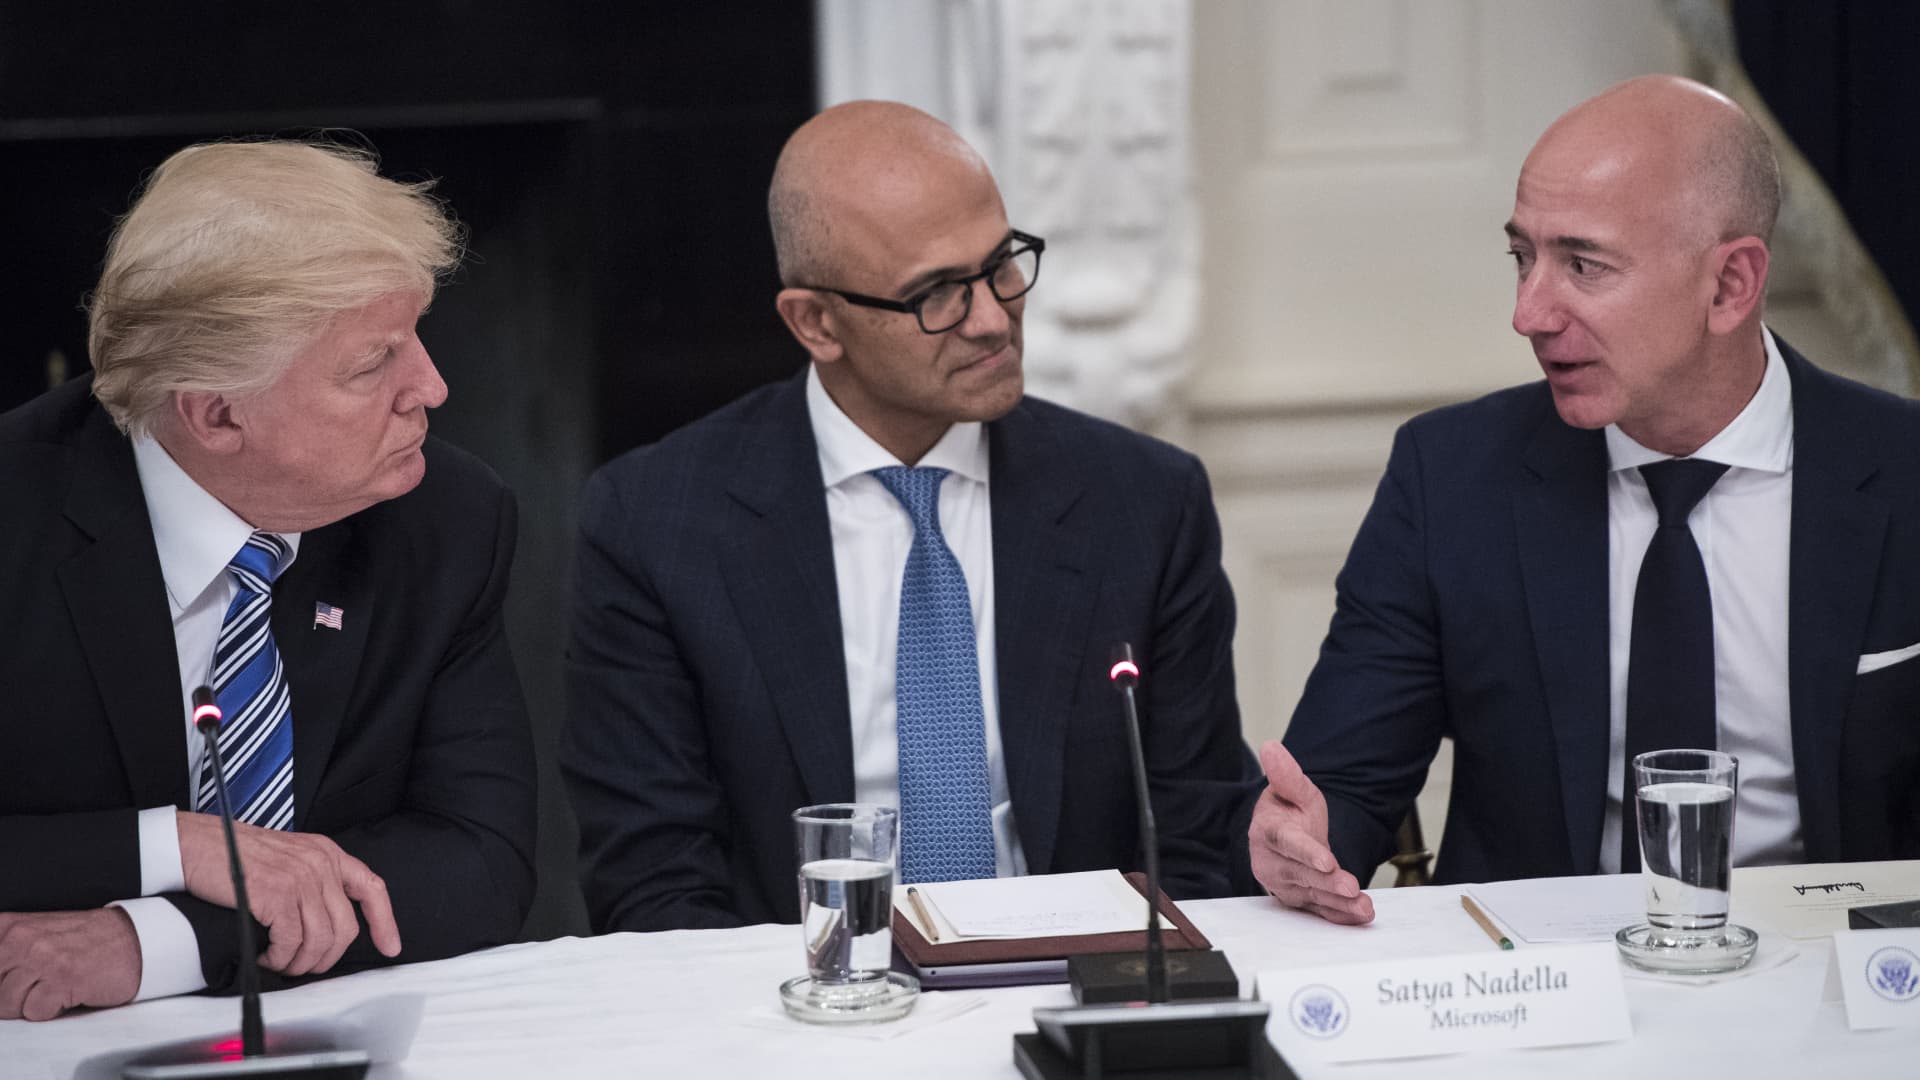 President Donald Trump speaks with Satya Nadella, Chief Executive Officer of Microsoft, and Jeff Bezos, Chief Executive Officer of Amazon during an American Technology Council roundtable in the State Dinning Room at the White House in Washington on June 19, 2017.